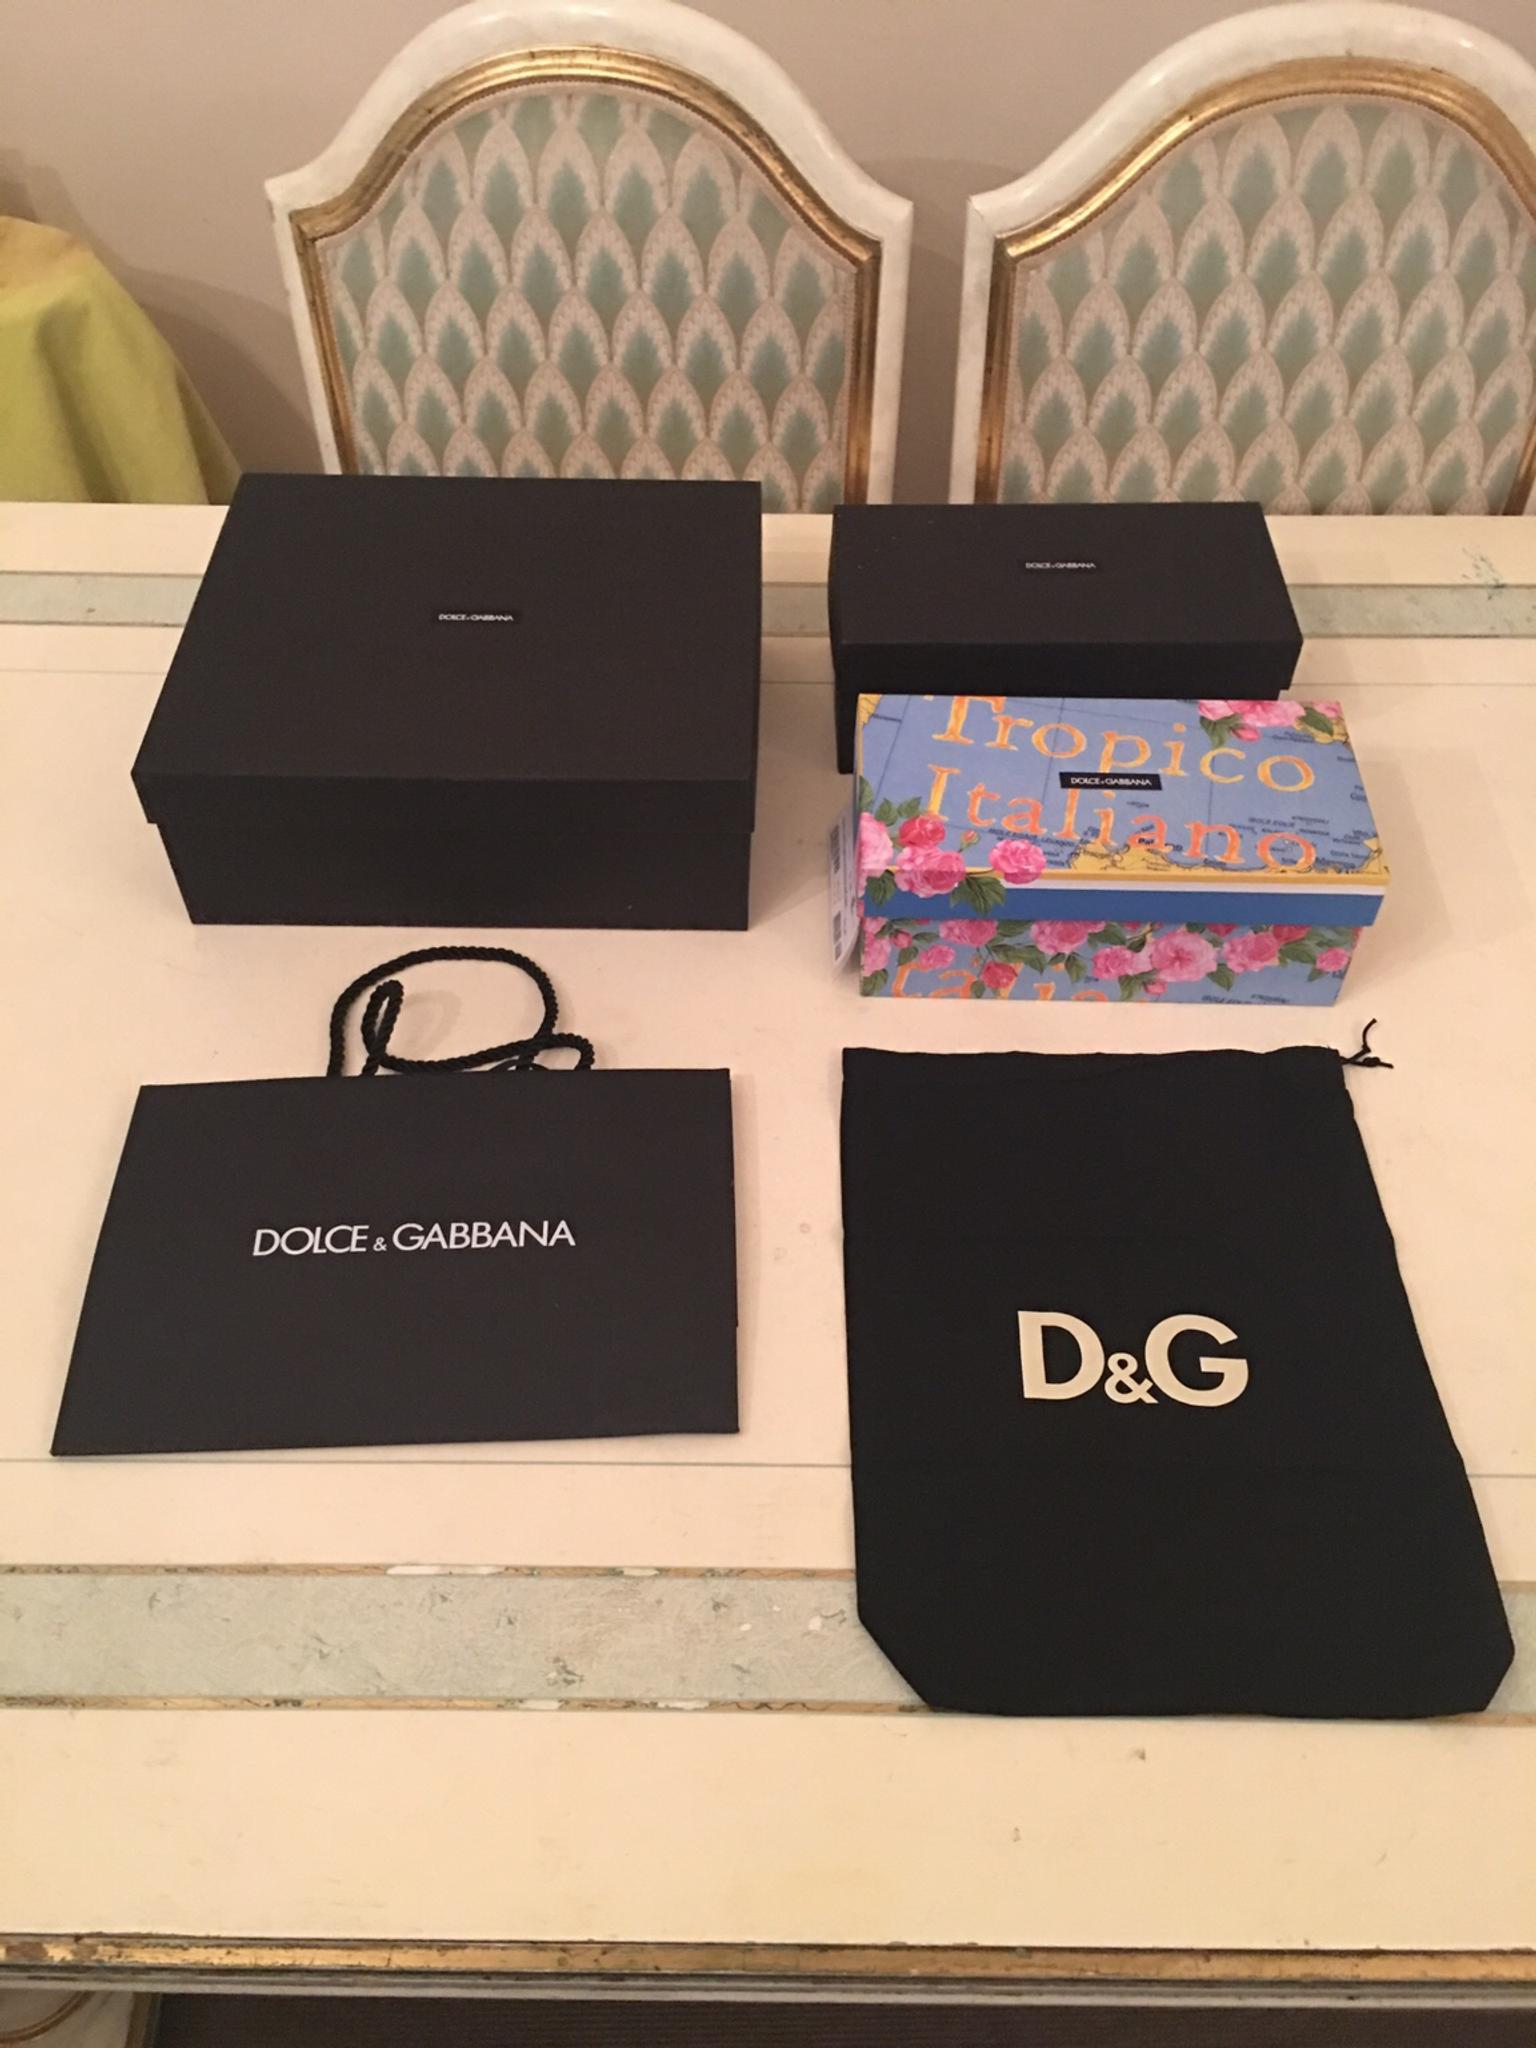 Dolce & Gabbana boxes / dust bag / paper bag in SW7 Chelsea for £25.00